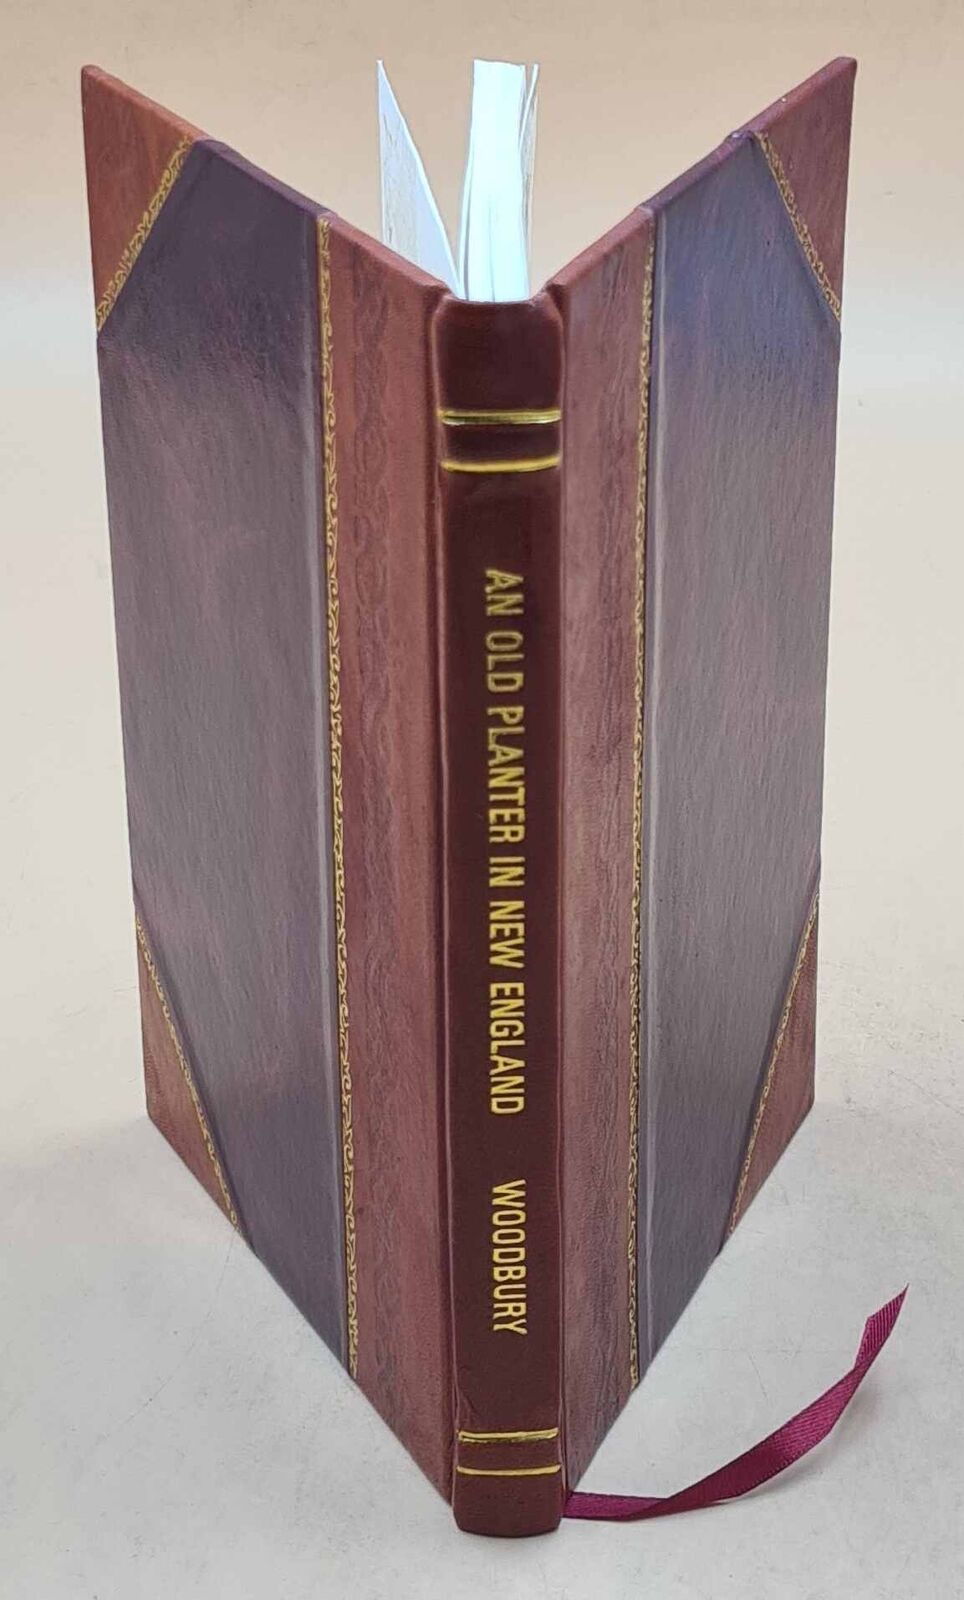 An old planter in New England : John Woodbury. 1885 by Woodbury, [Leather Bound]